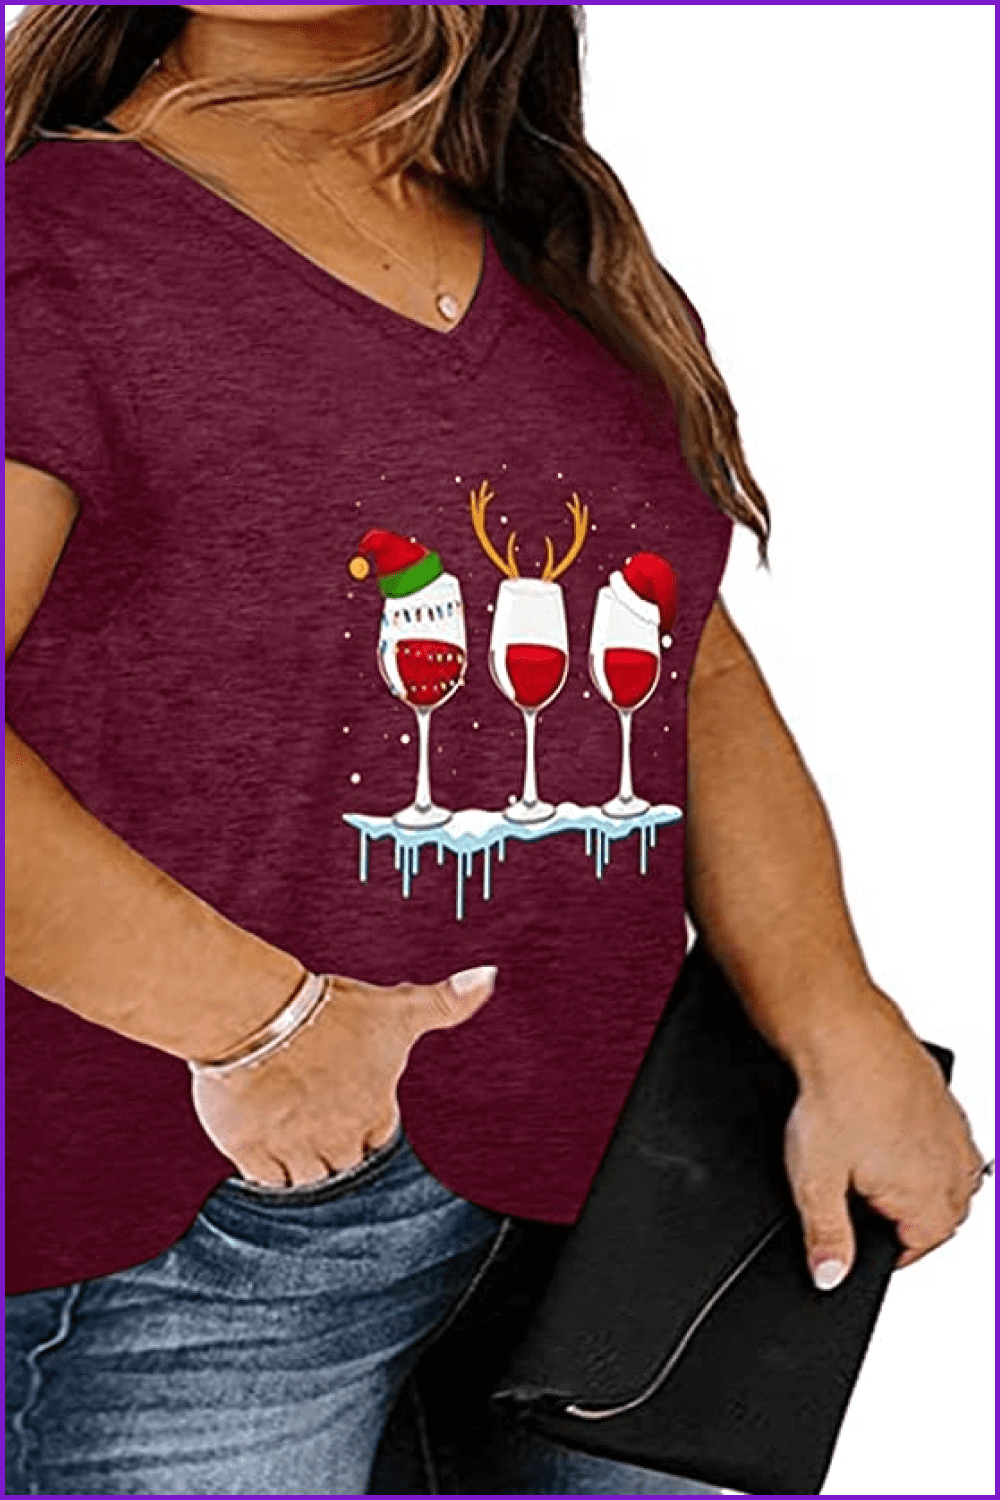 Girl in a t-shirt with three drinks in Christmas hats and horns.